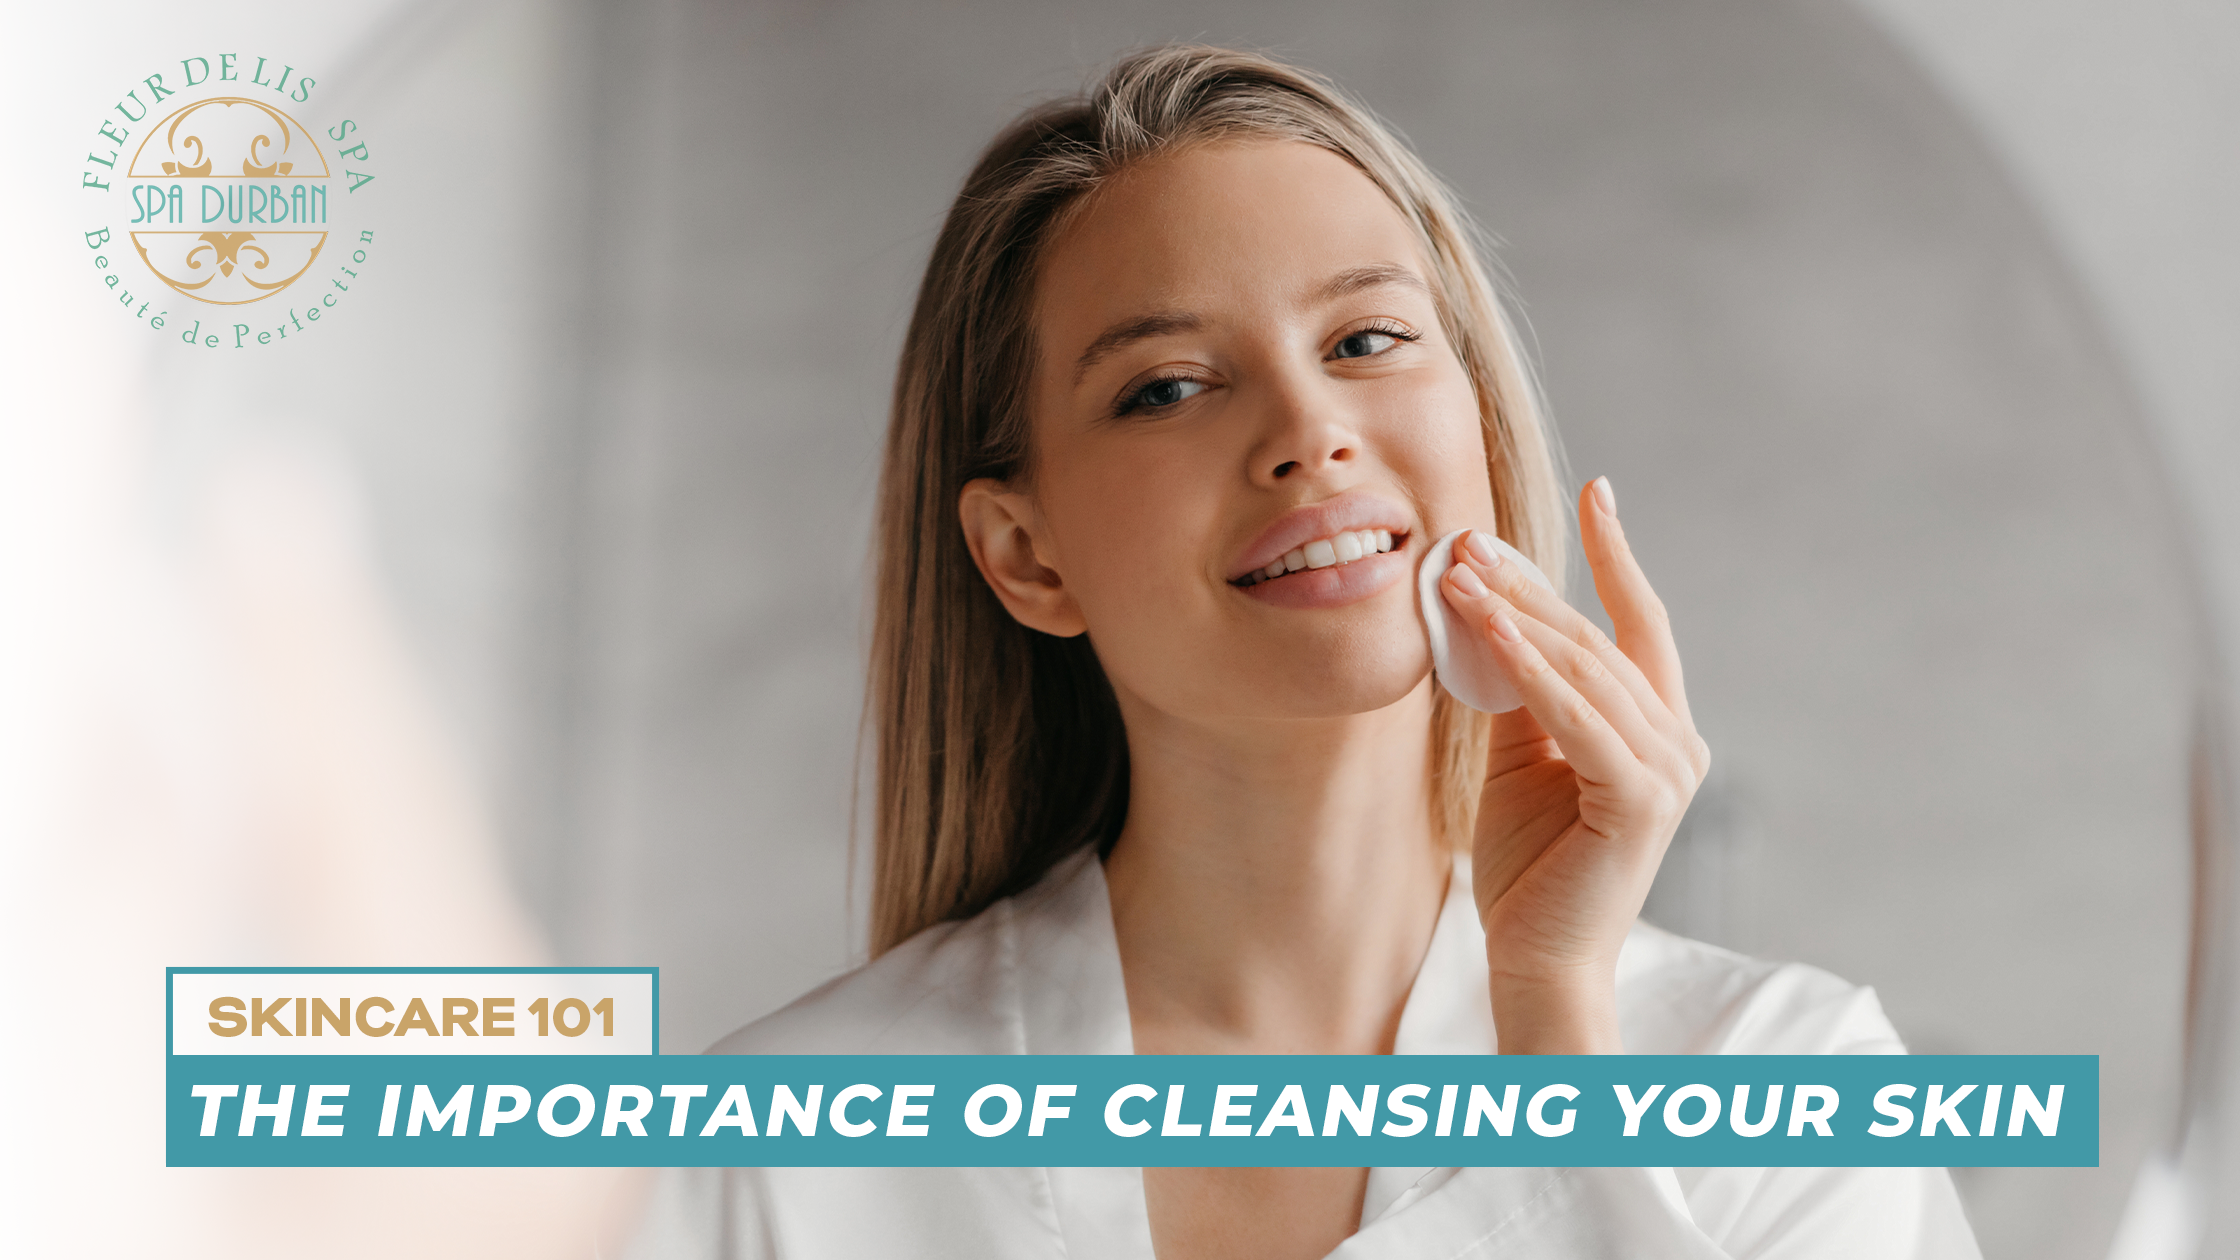 Skincare 101: The Importance of Cleansing Your Skin